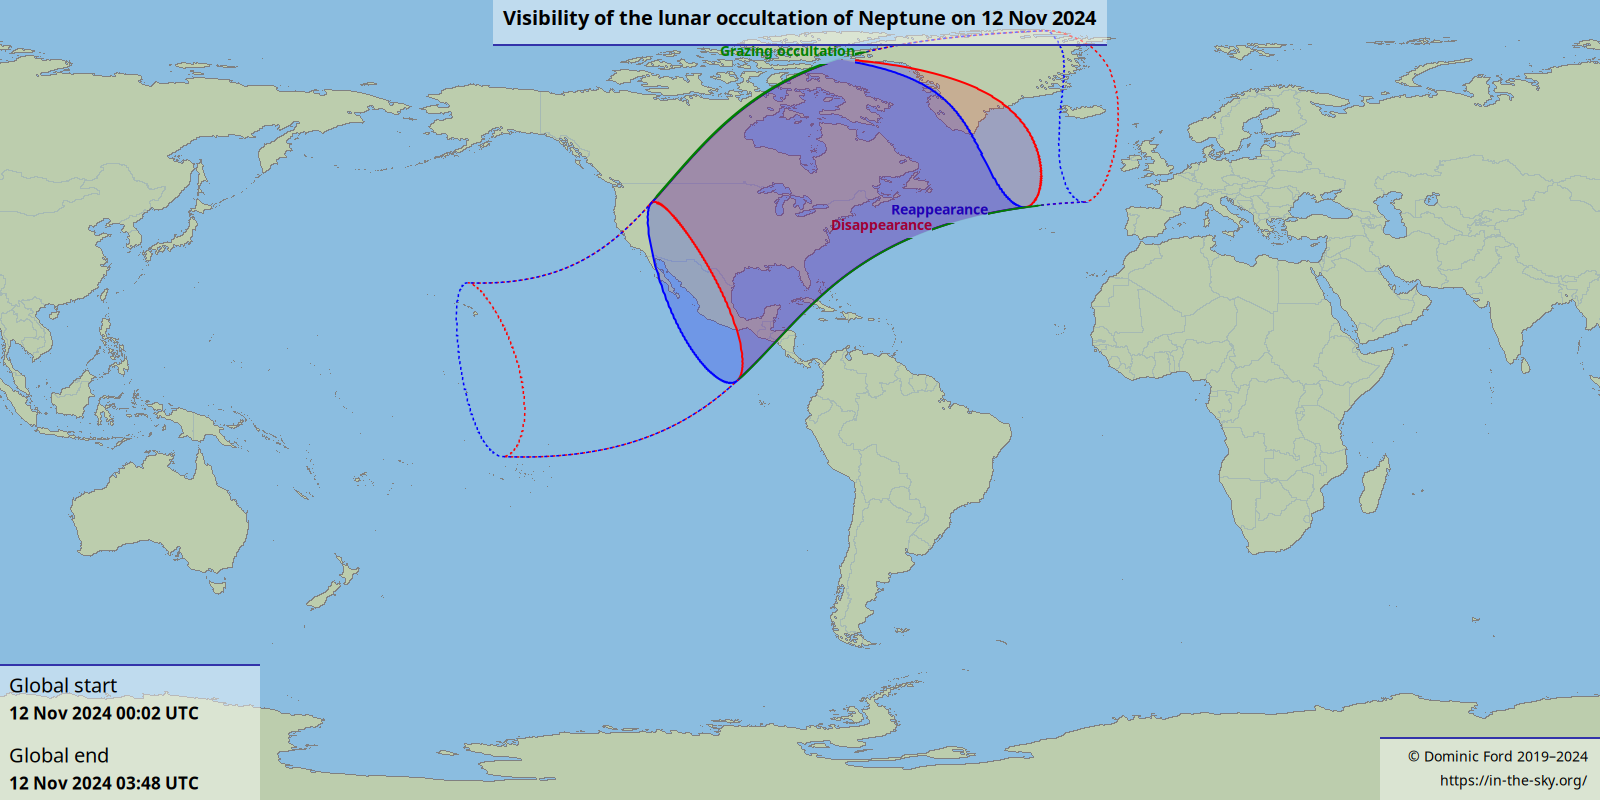 Map showing where the occultation is visible